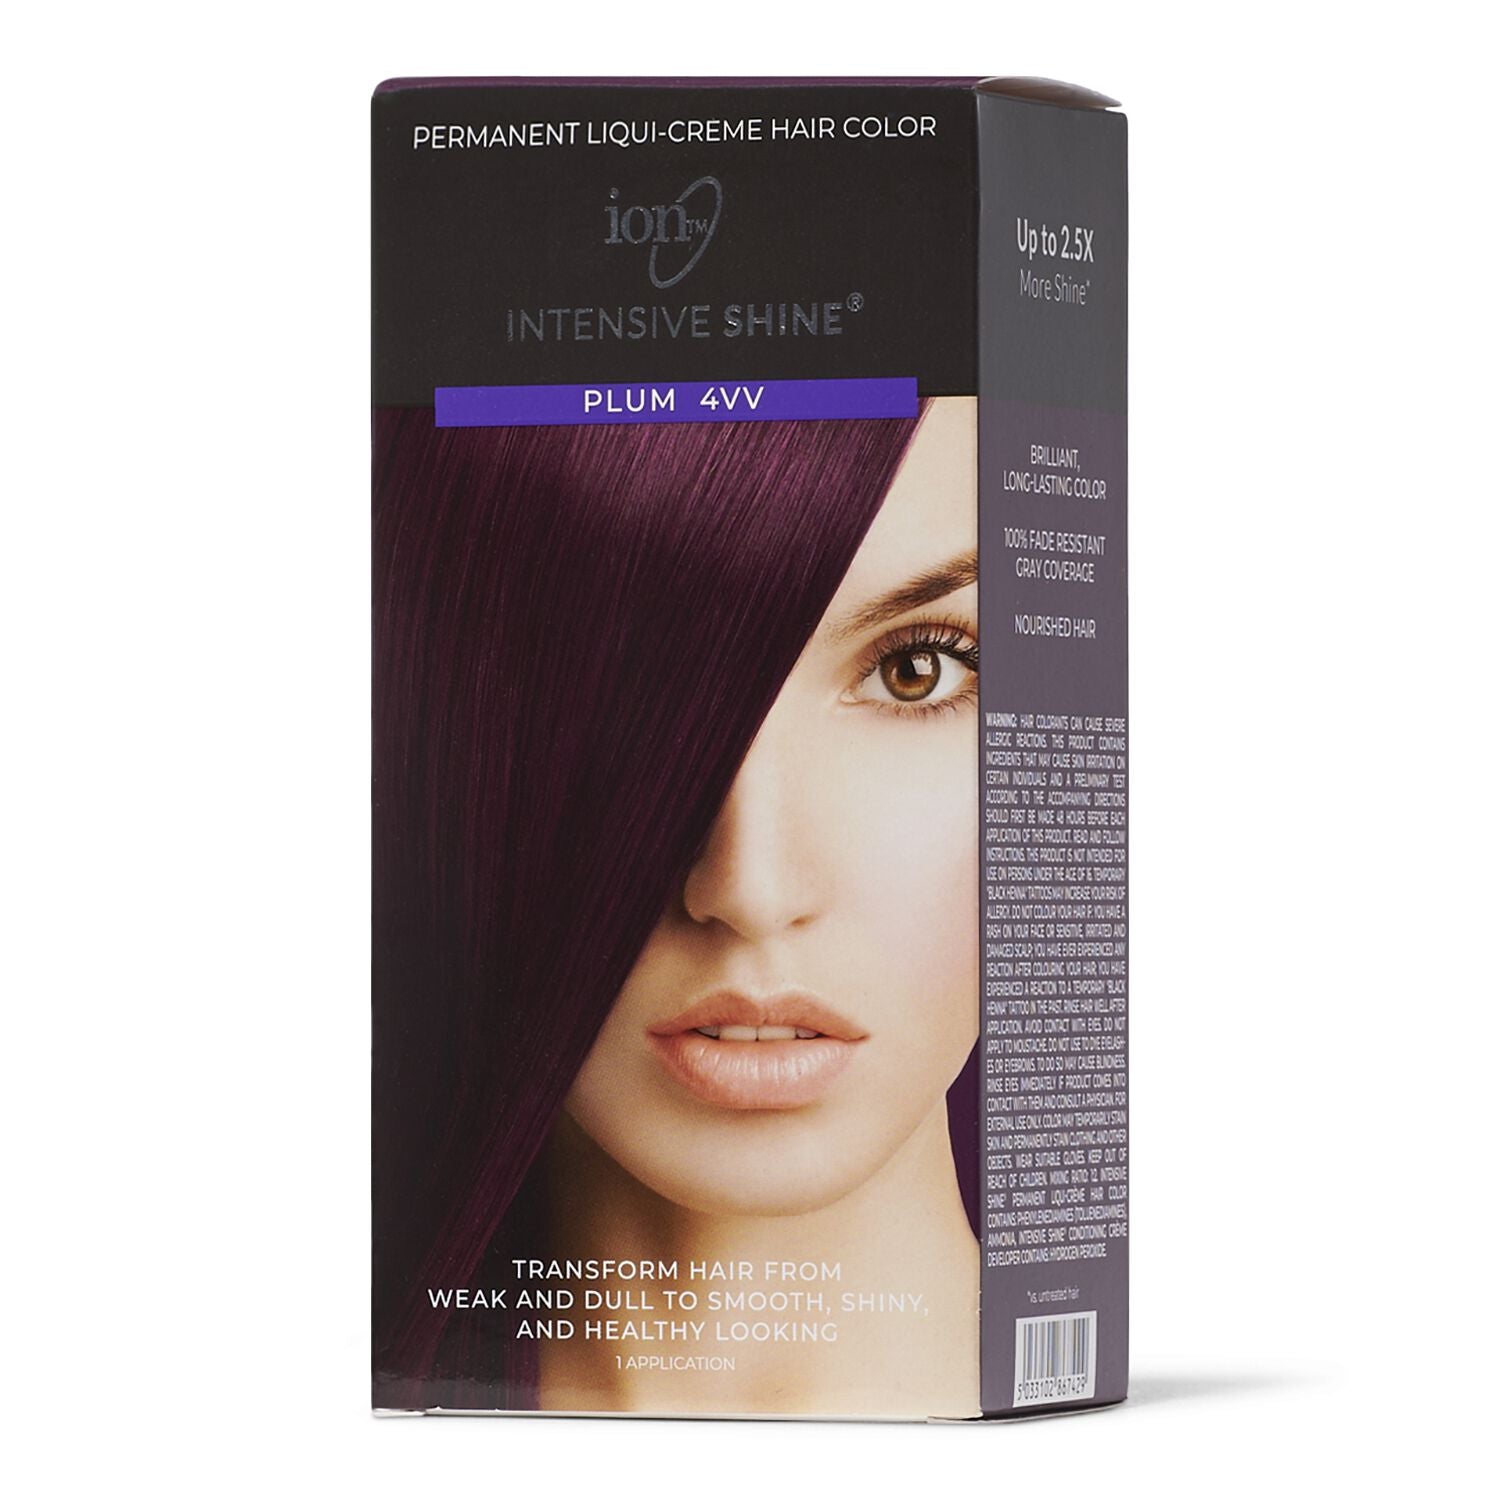 Intensive Shine  by   ion Intensive Shine Hair Color Kit Plum 4VV